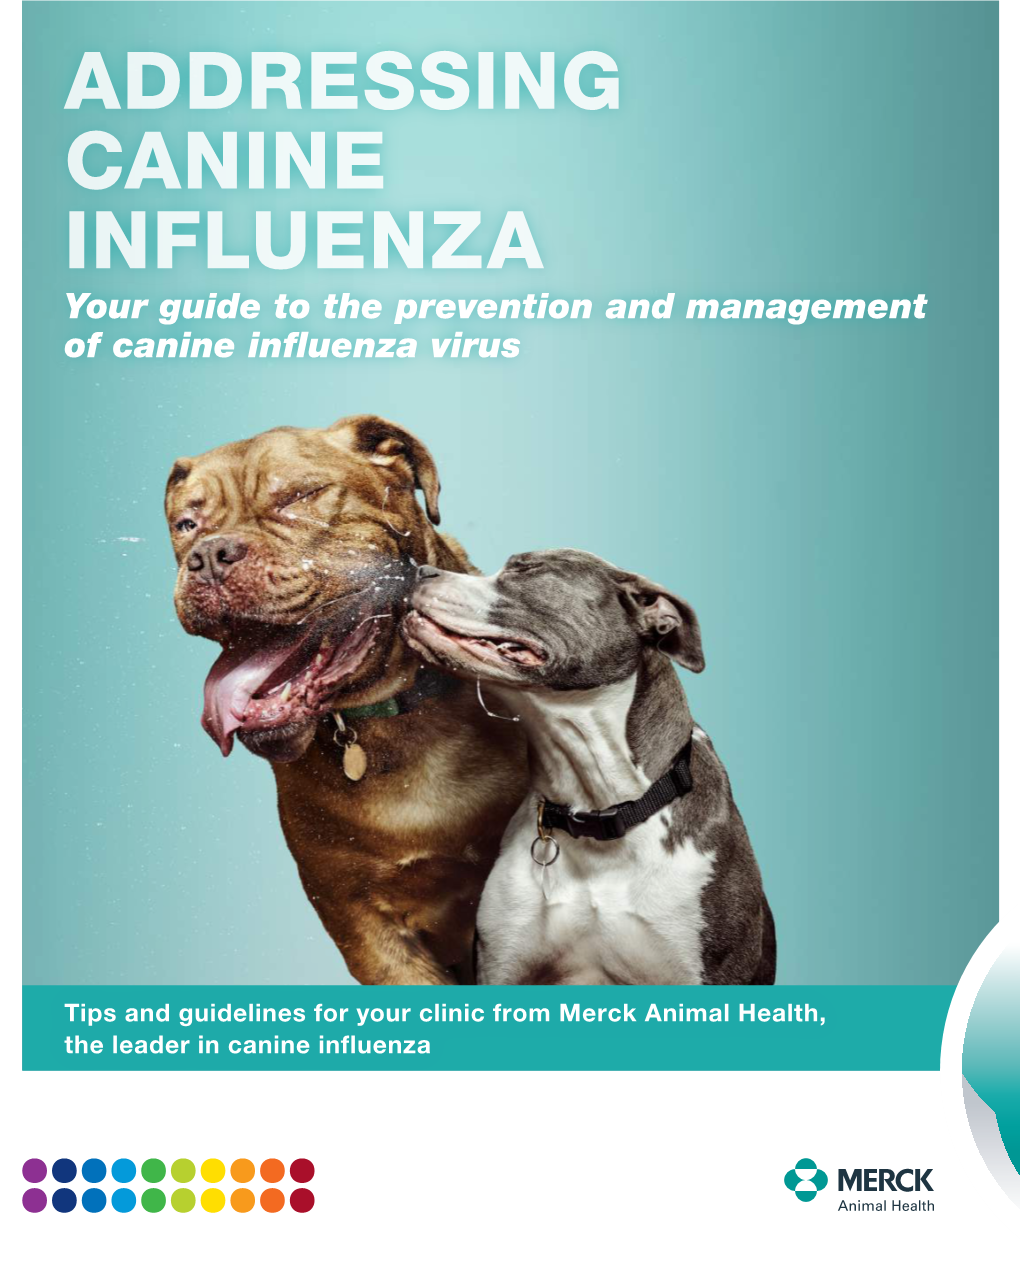 ADDRESSING CANINE INFLUENZA Your Guide to the Prevention and Management of Canine Influenza Virus